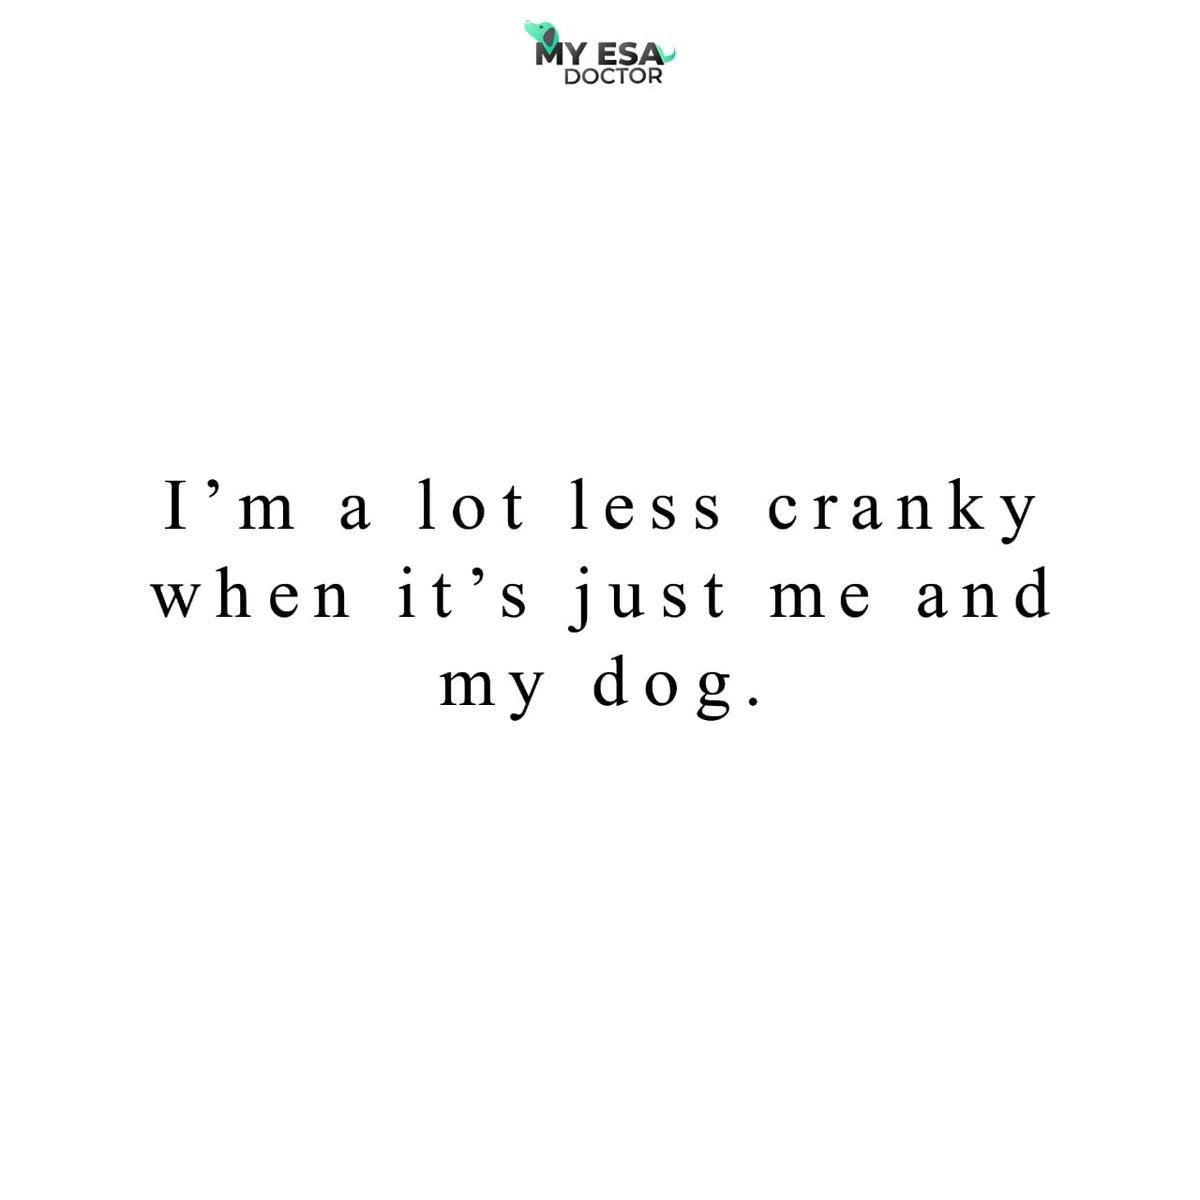 Well, that's true for me. What about you?

#ESAletter #emotionalsupportdog #emotinalsupportcat #educational #myesadoctor #furrendsupclose #catsygram #dogowner #dog_feature #magnificent_meowdels #my_loving_pet #my_pet_feature #doggos #petoftoday #puppers #igmeows #meowvswoof #vamp